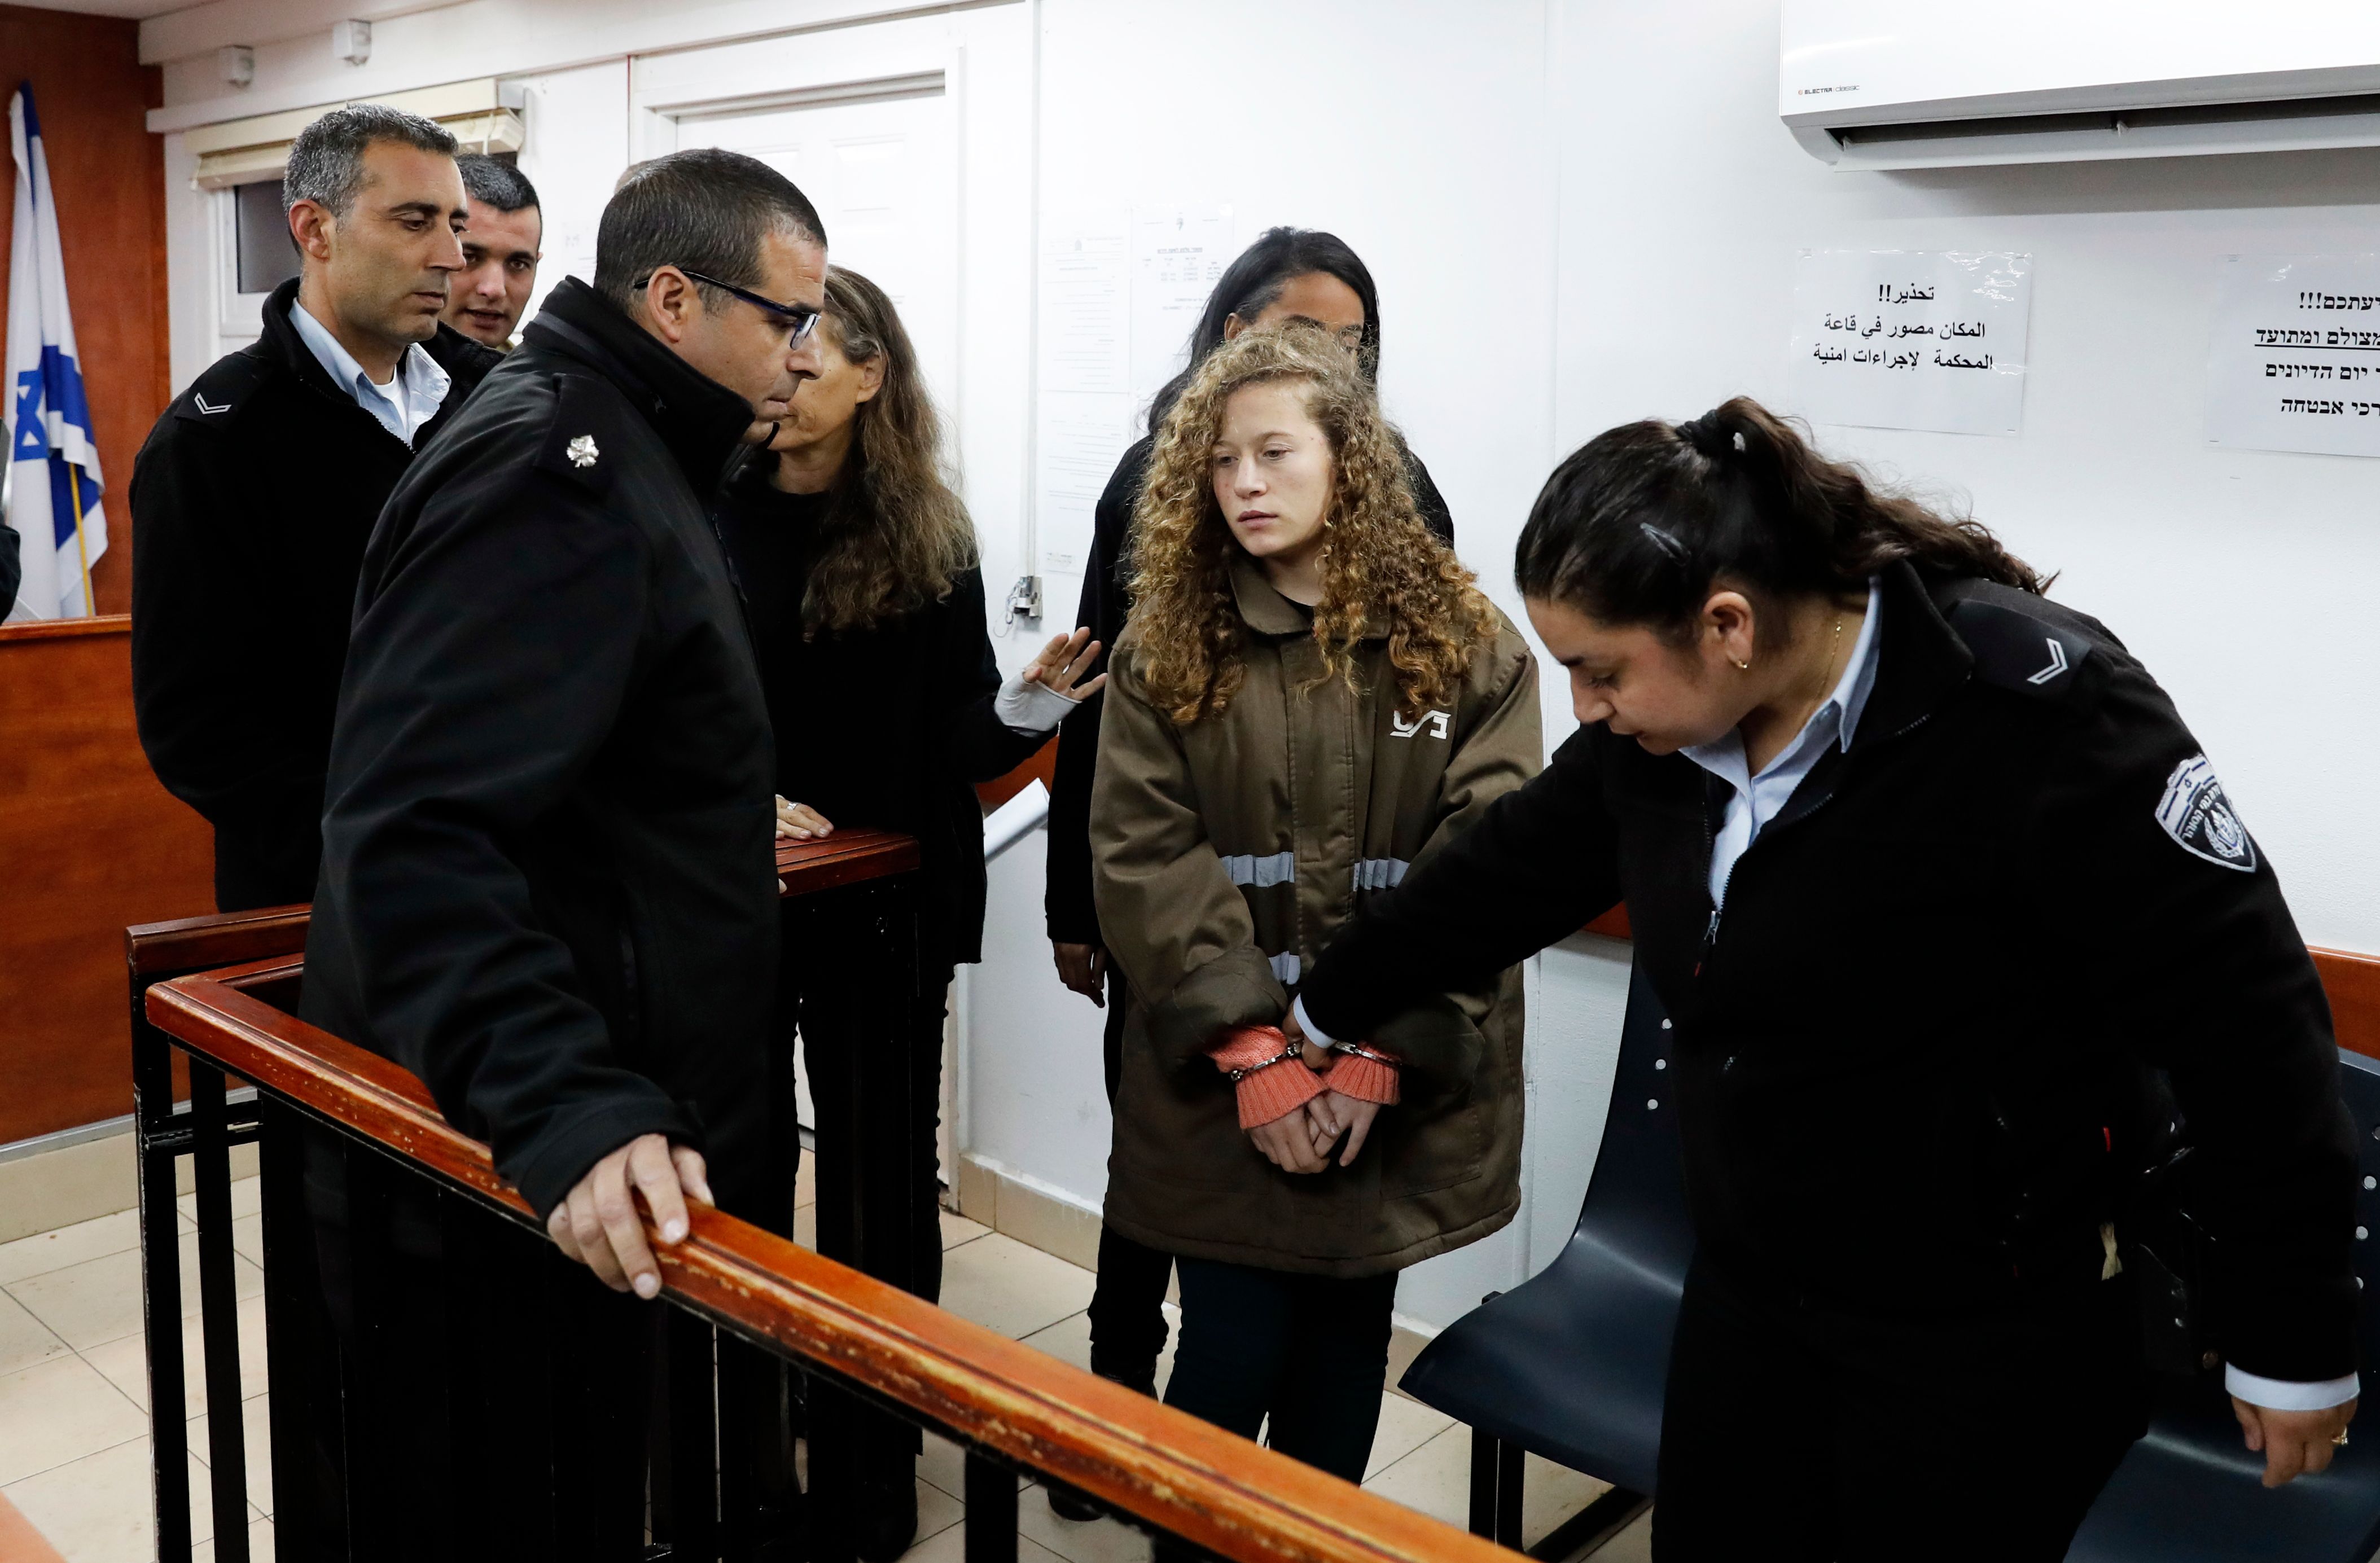 Sixteen-year-old Ahed Tamimi arrives for a hearing at Ofer military court